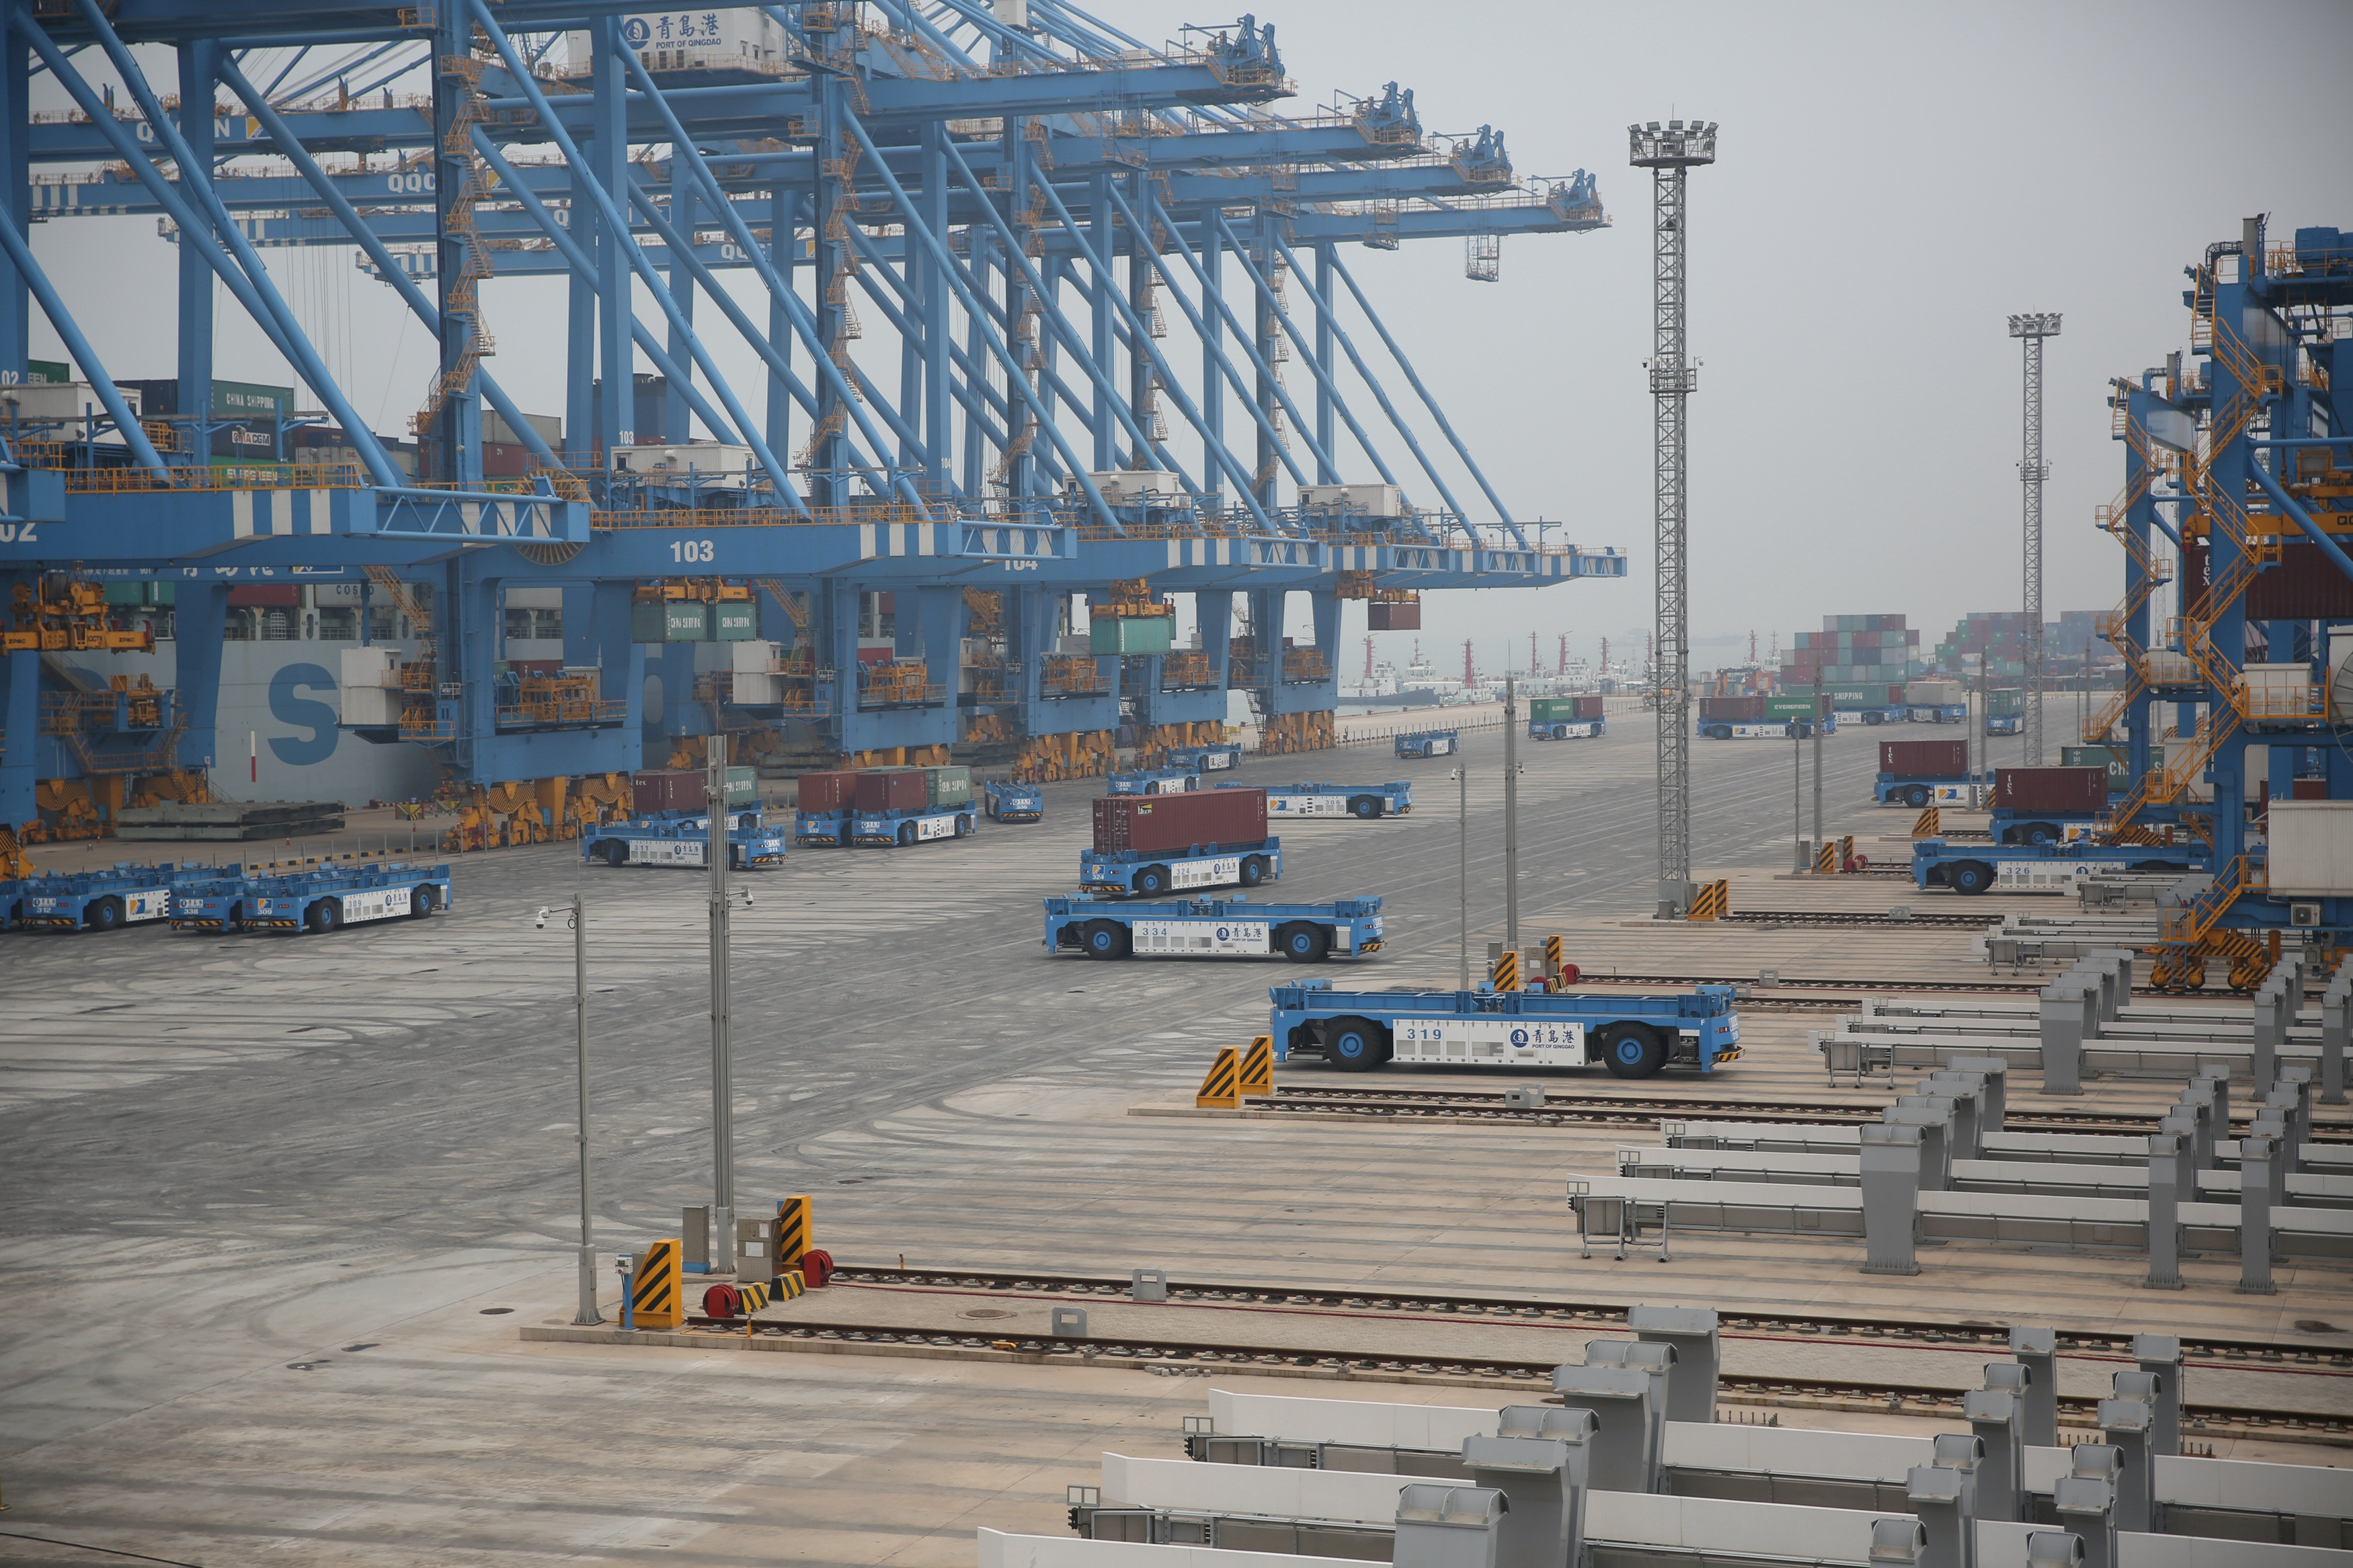 Automated guided vehicles (AGV) operate at an automated container terminal in Qingdao Port